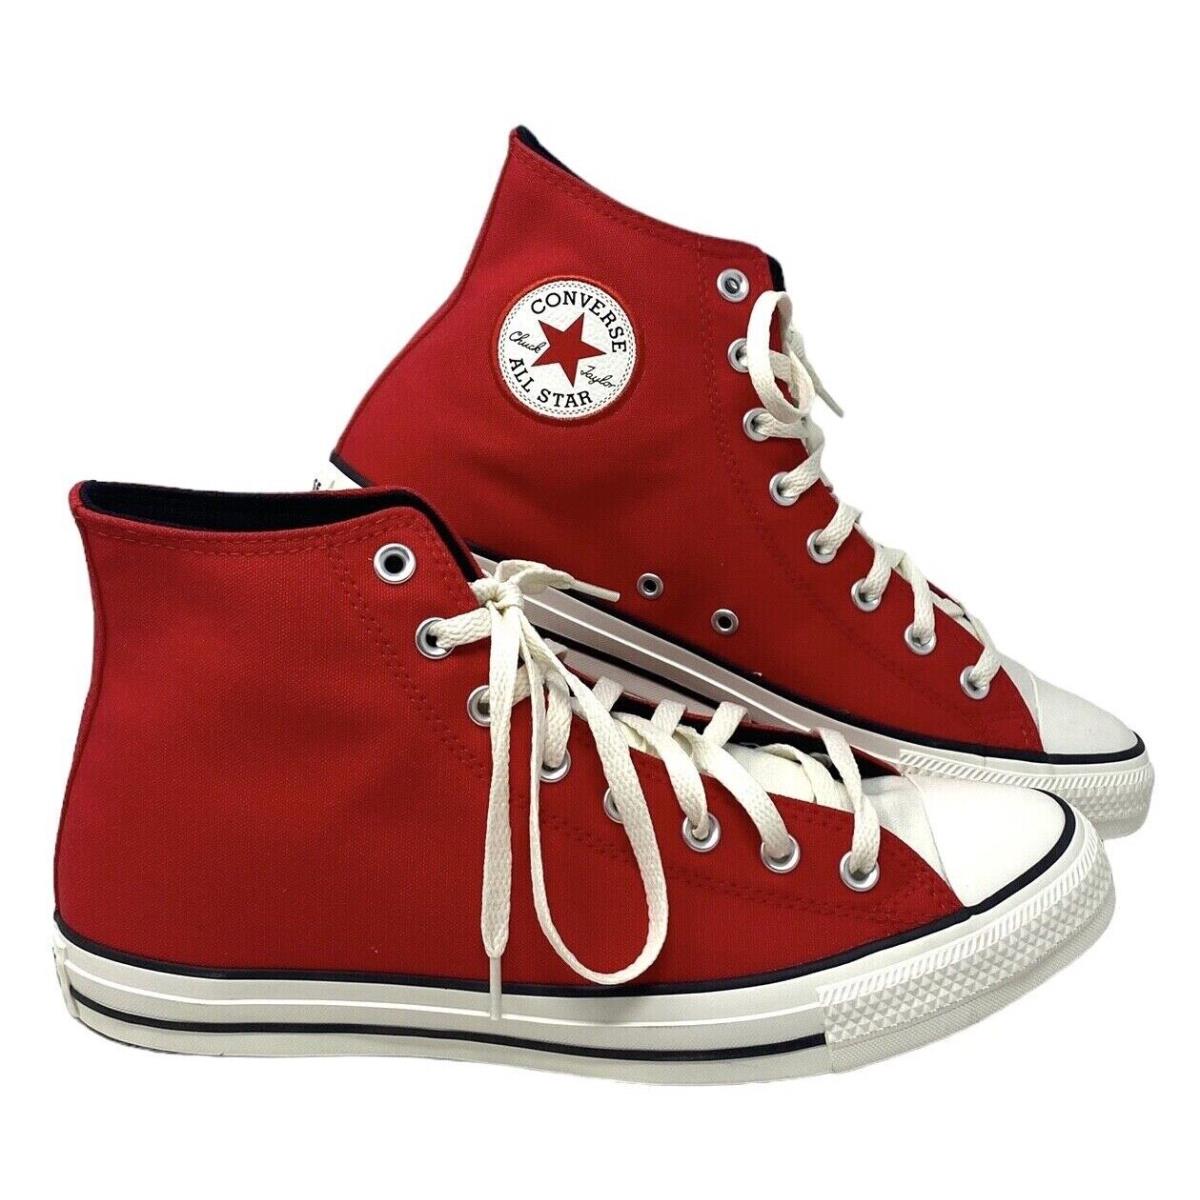 Converse Chuck Taylor Canvas High Top Red White Sneaker For Men Shoes A06008F